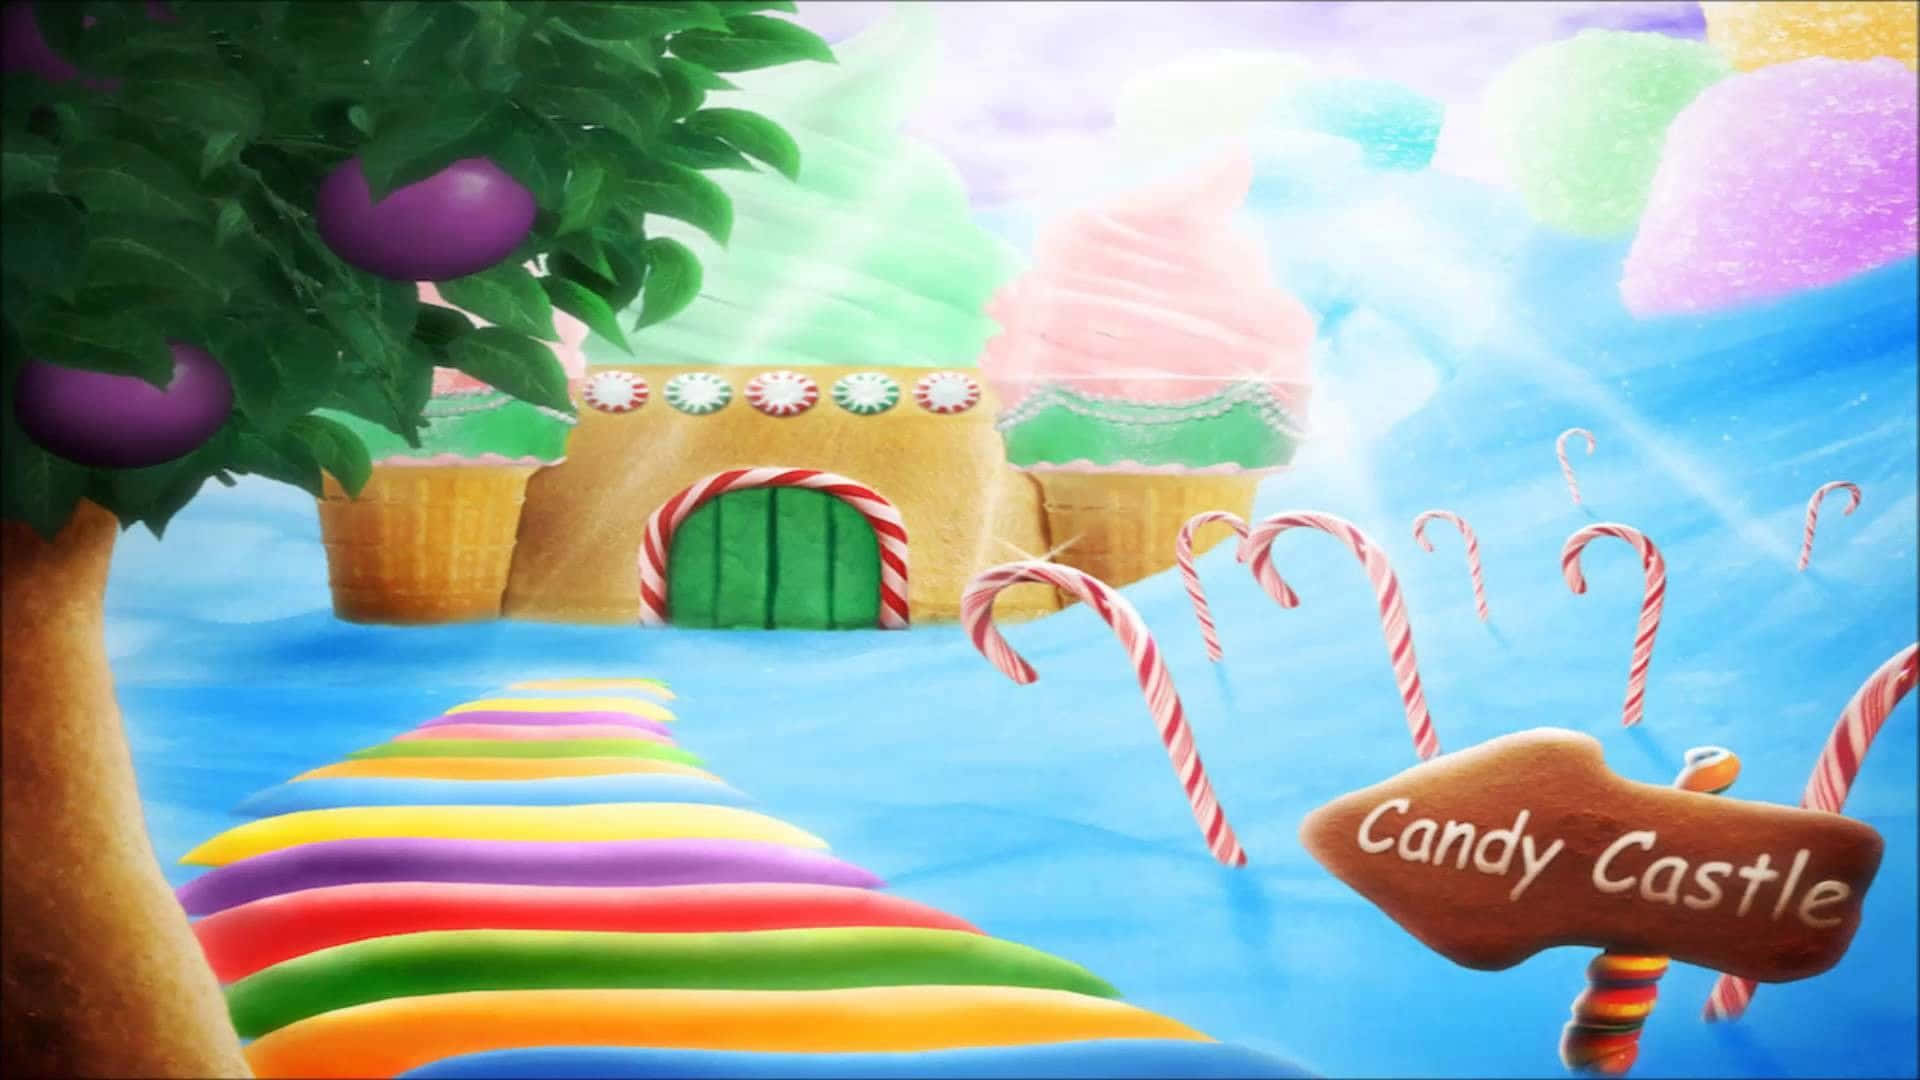 Journey through the magical world of Candy Land! Wallpaper